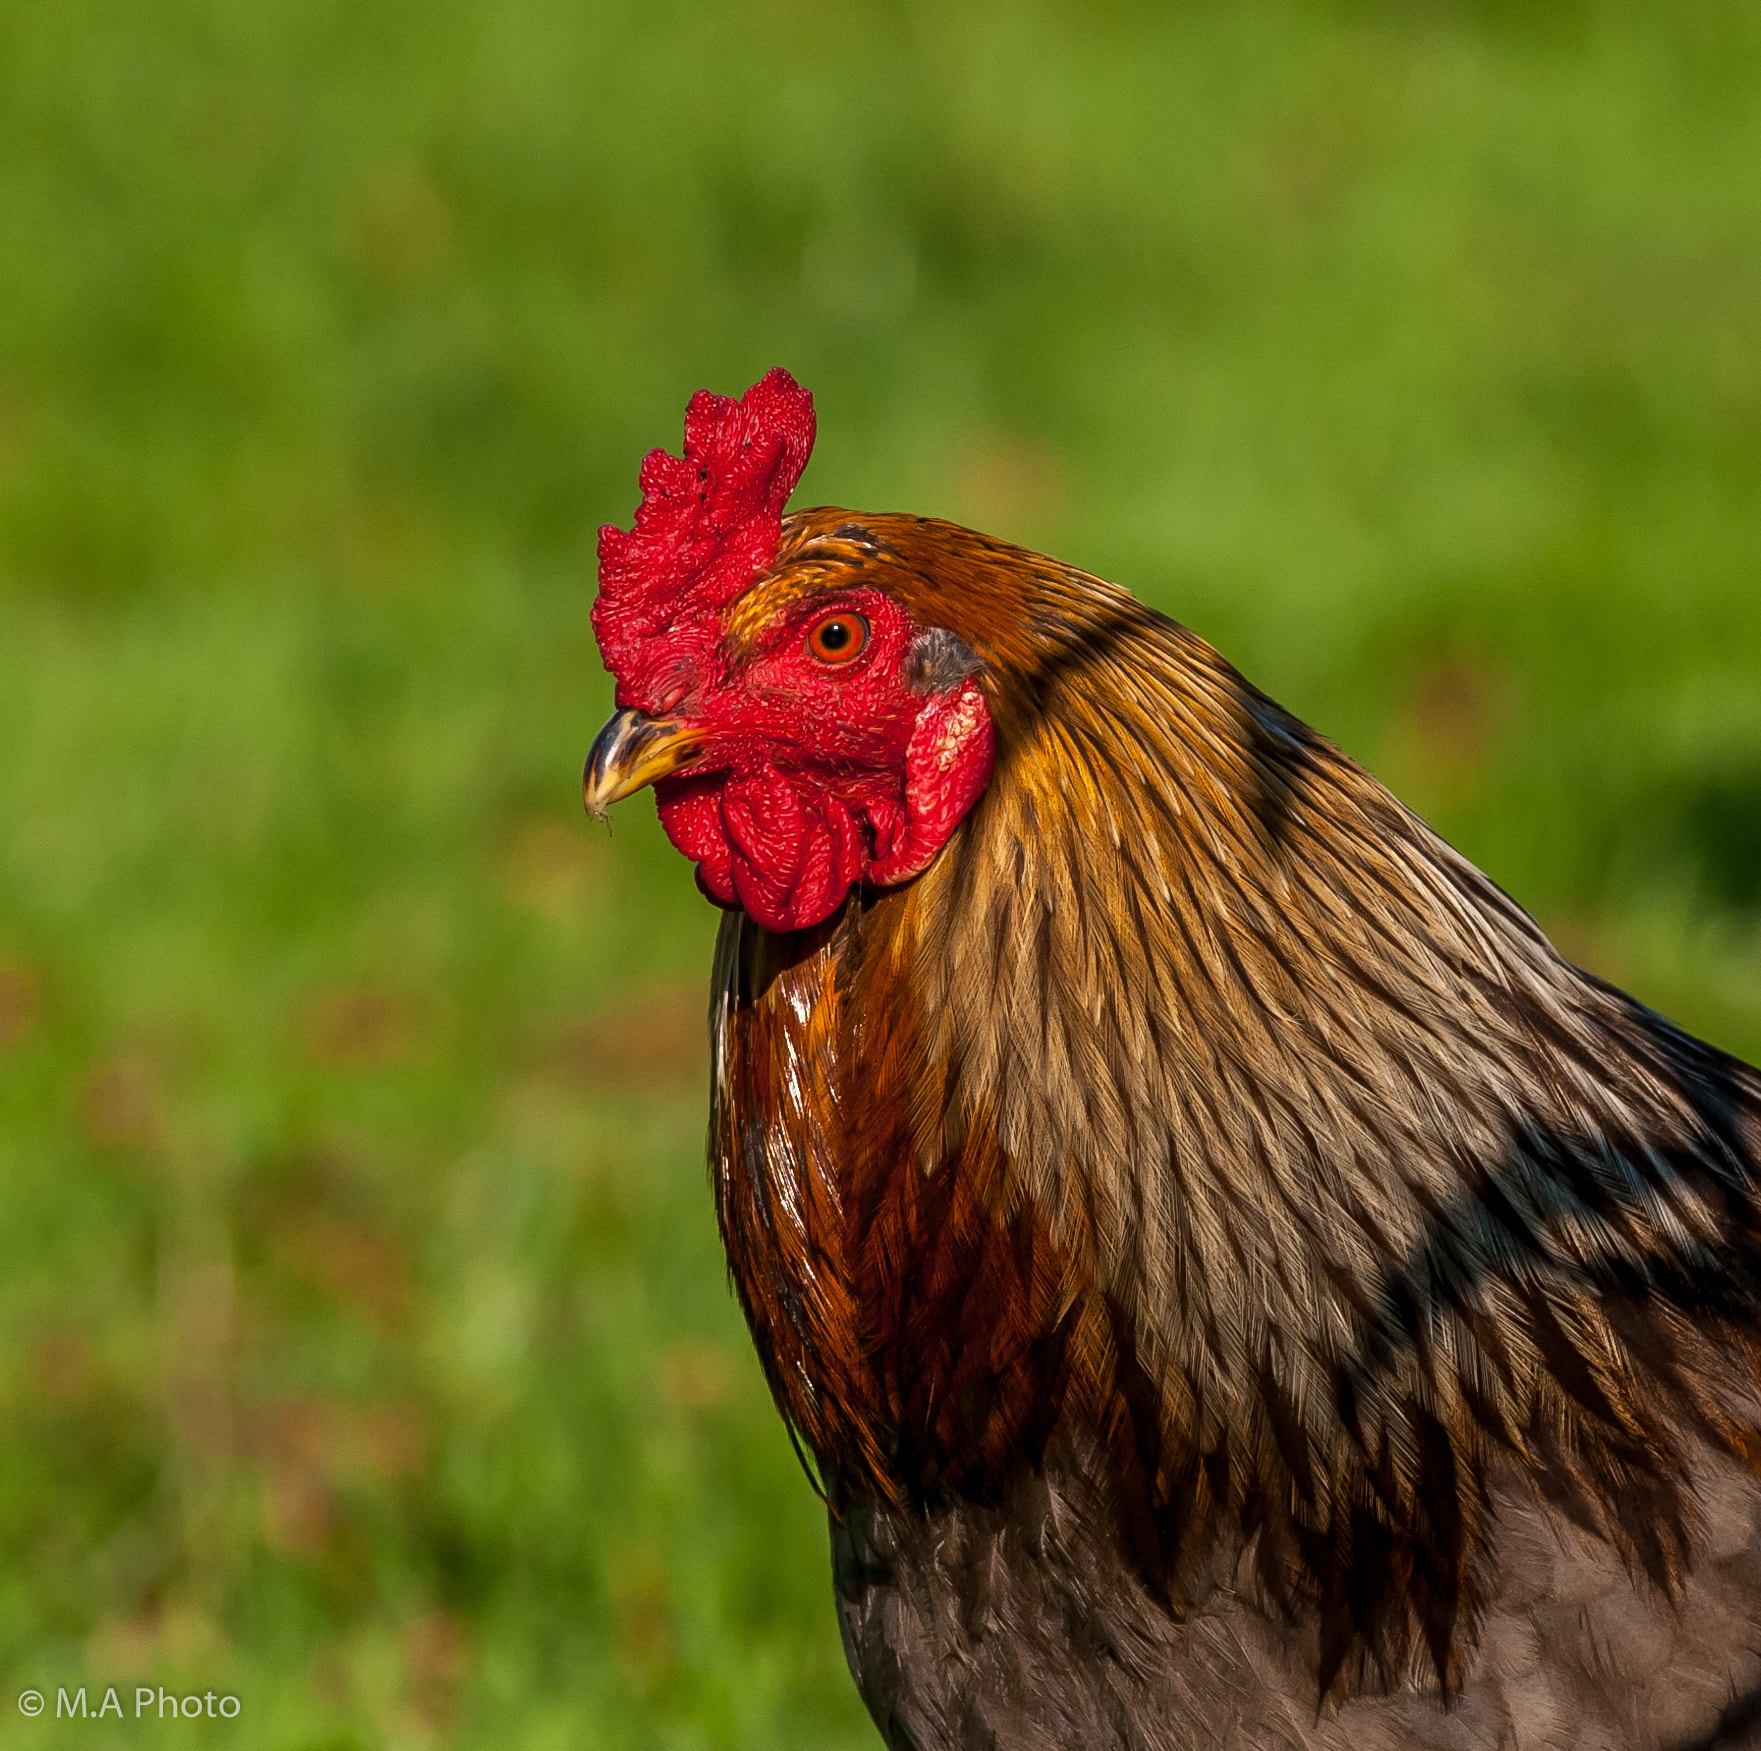 Nikon D3 + Sigma 150-600mm F5-6.3 DG OS HSM | C sample photo. Rooster photography